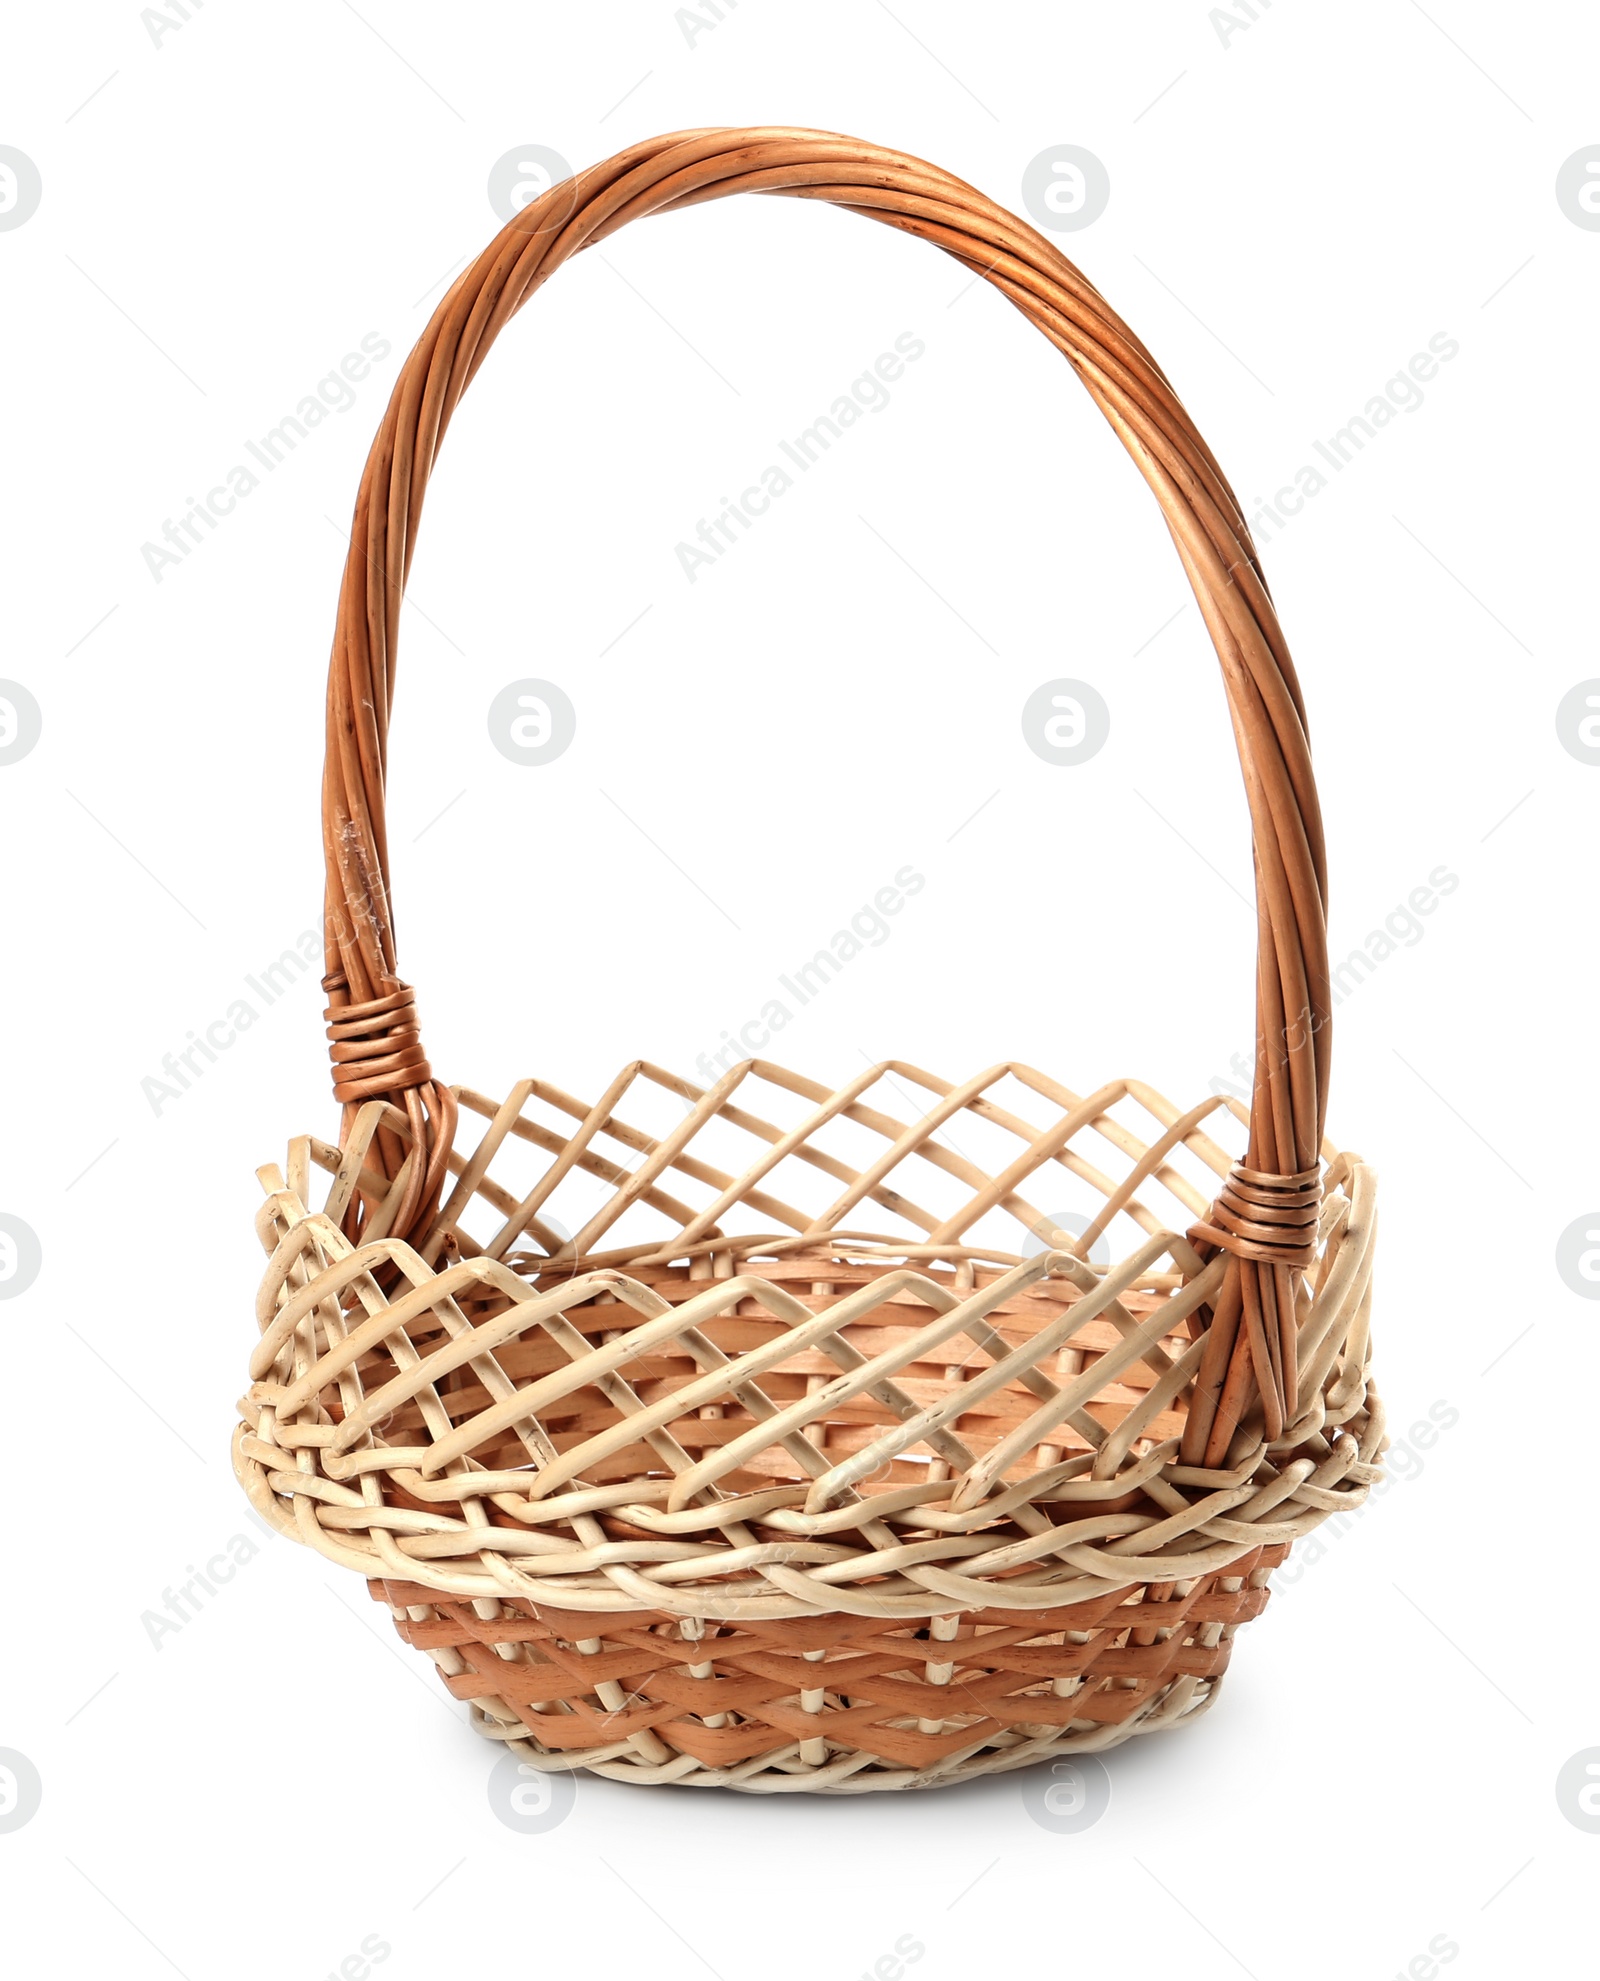 Photo of Empty wicker basket isolated on white. Easter item